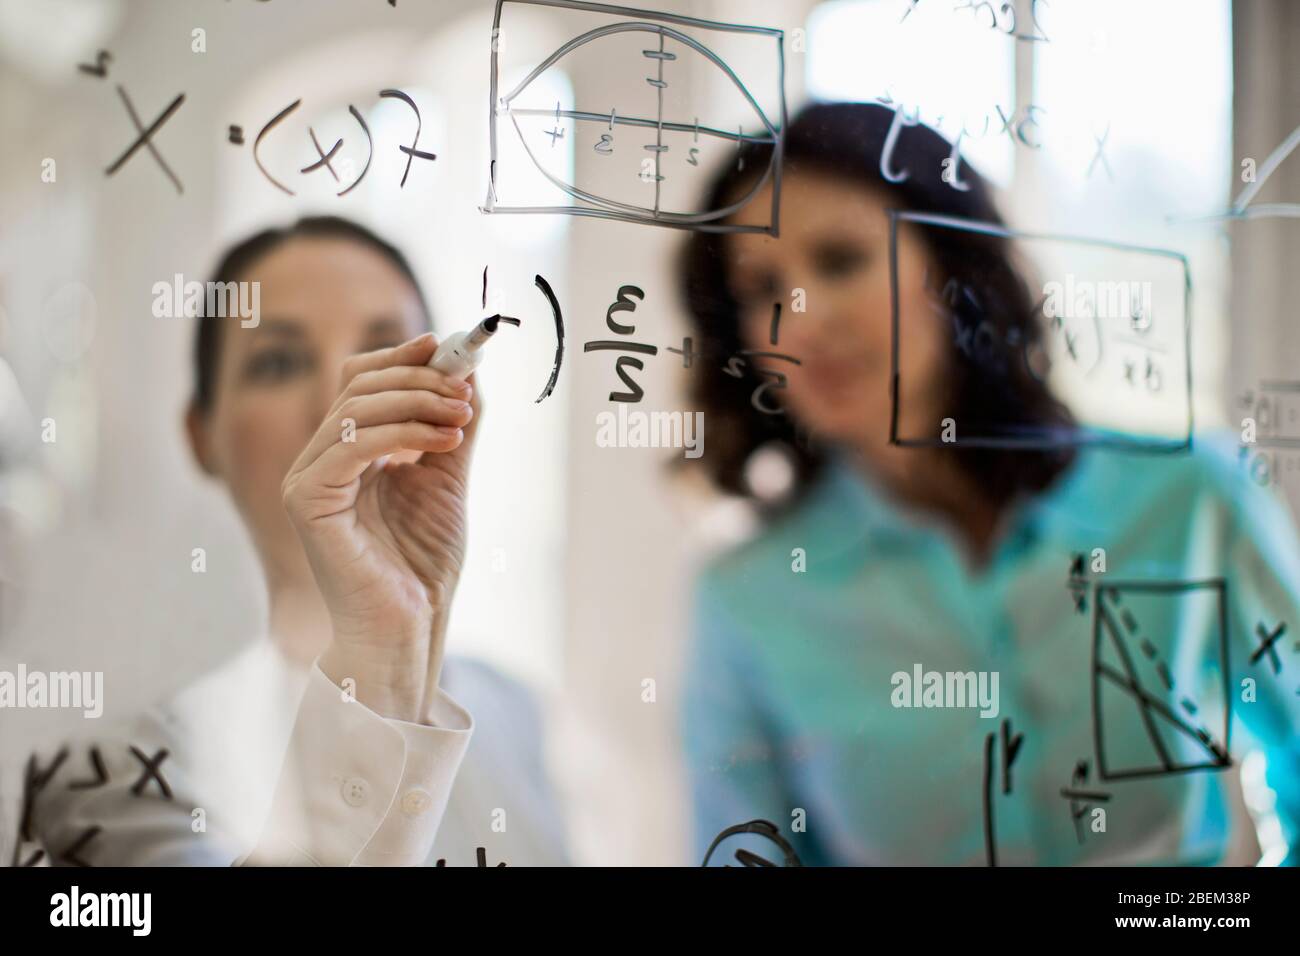 Mathematicians working on solving an equation Stock Photo